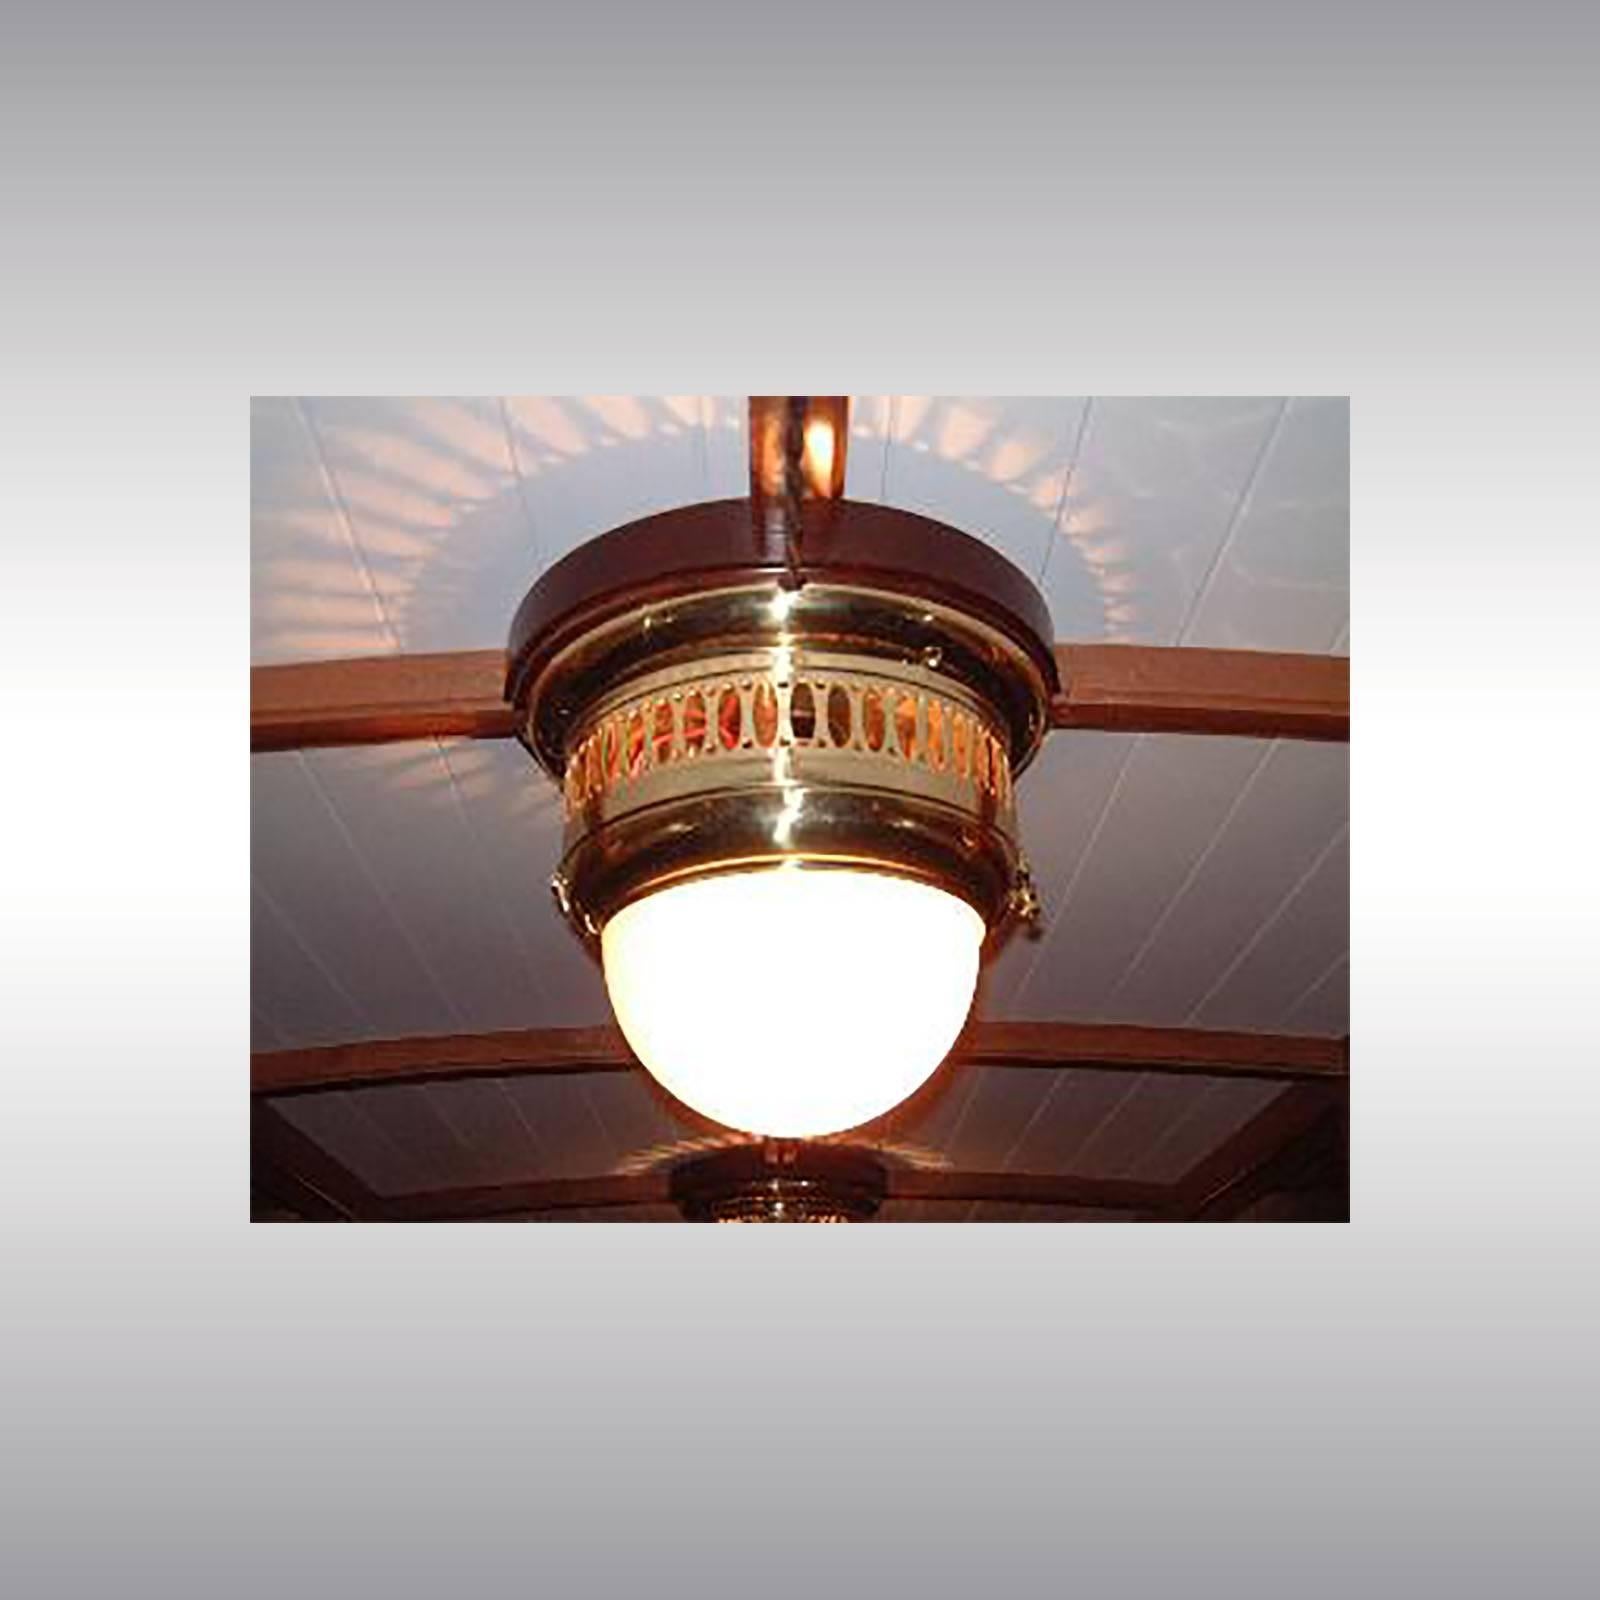 Wall or ceiling light with opaline glass, pictured in brass, designed for the viennese tram/streetcar
Brass, optionally varnished or nickel-plated, all other surfaces on request, opaline-glass, hand blown
ll components according to the UL